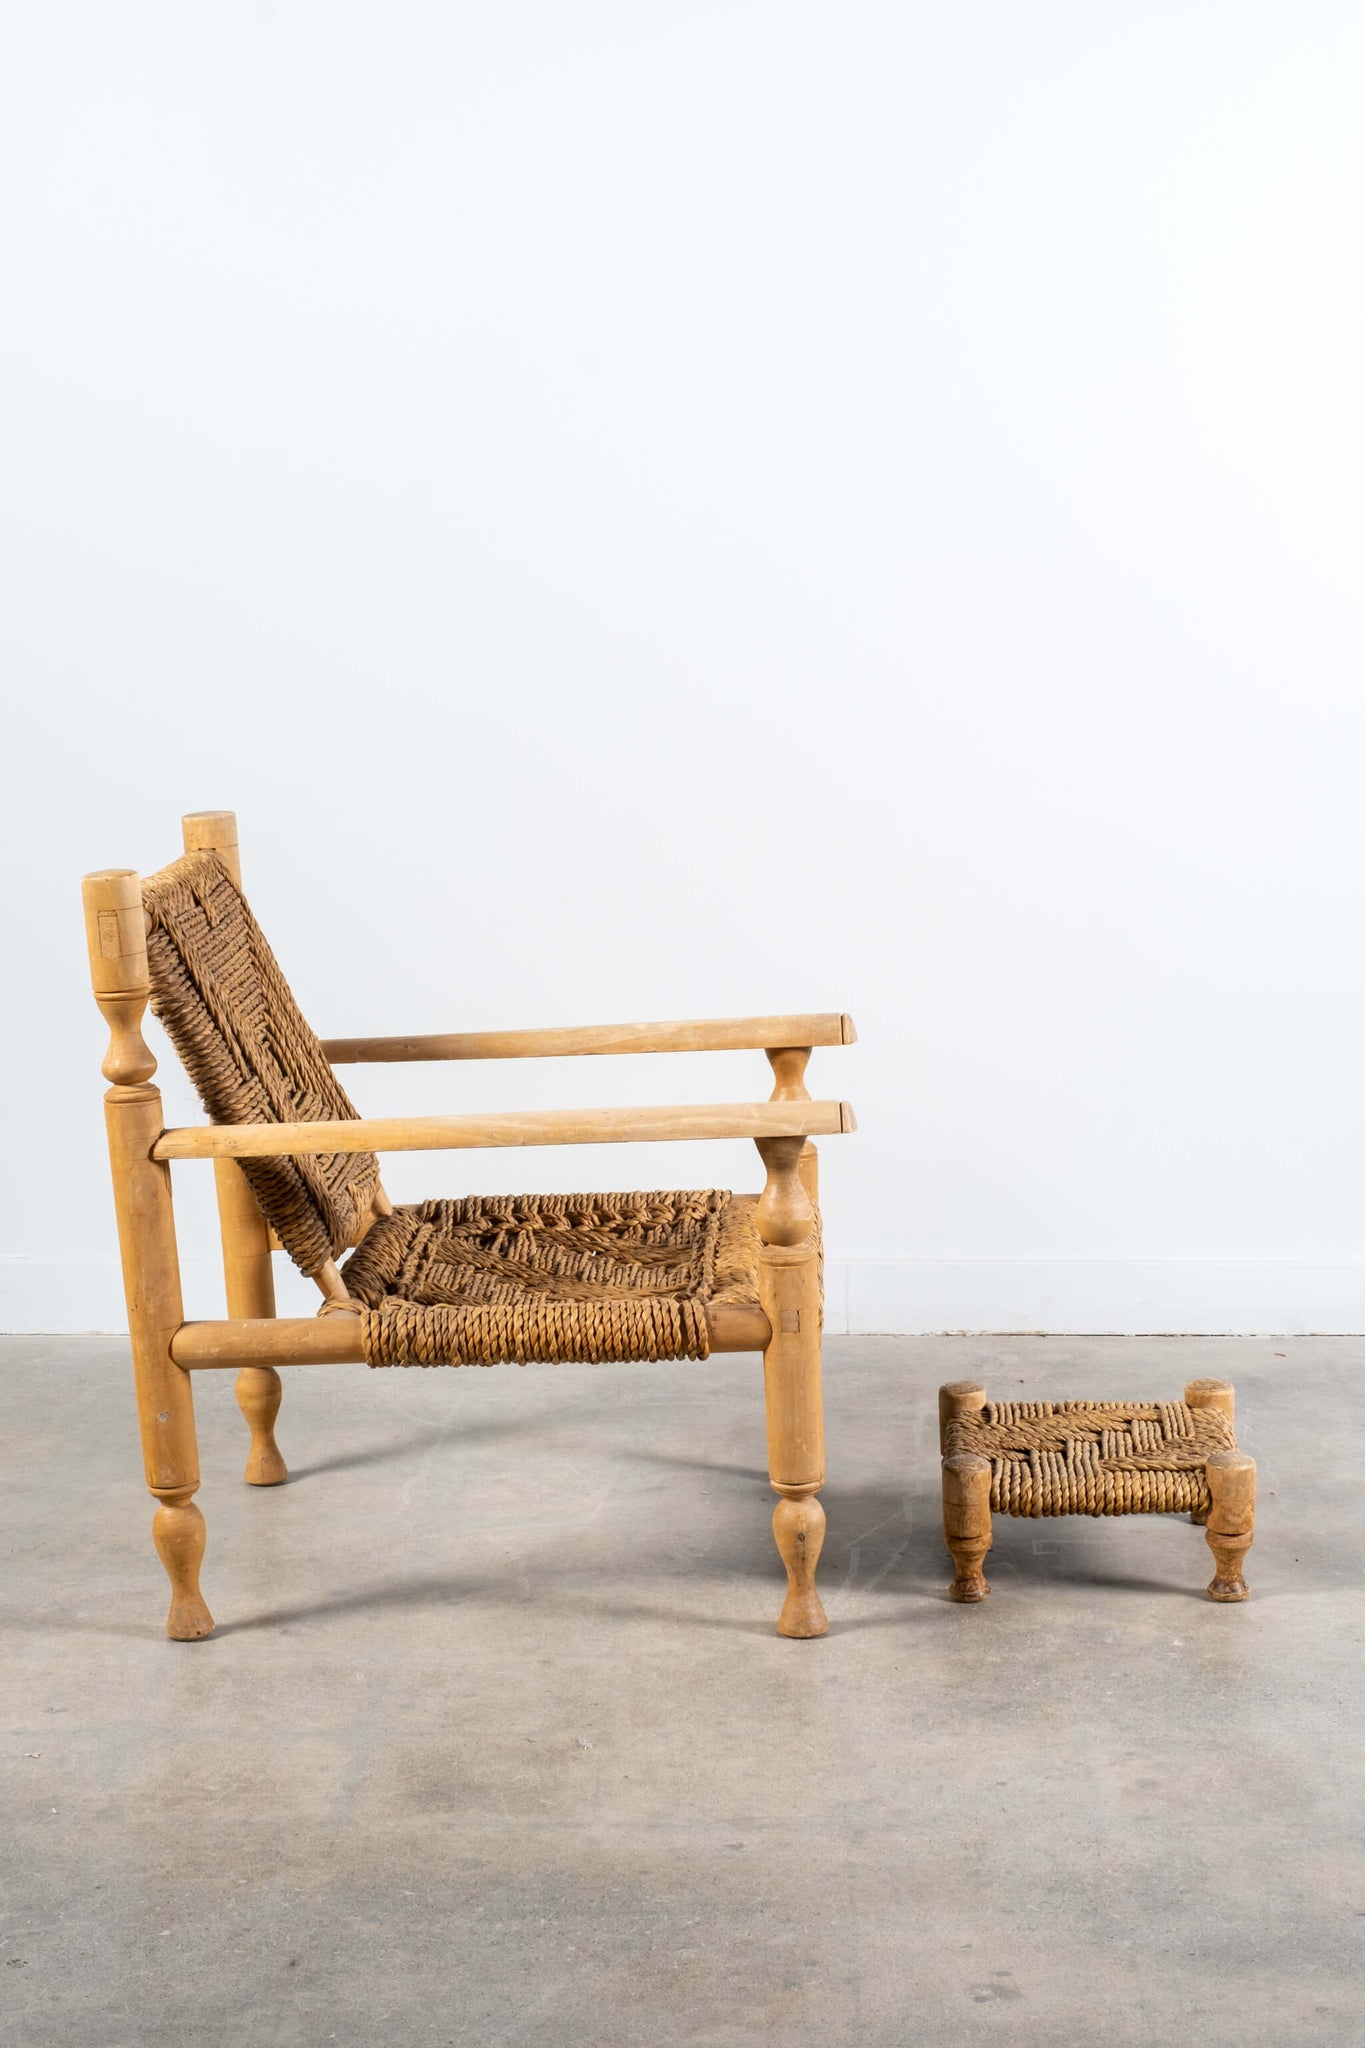 Vintage French Wood and Rope Armchairs with Footstools Adrien Audoux and Frida Minet, side view